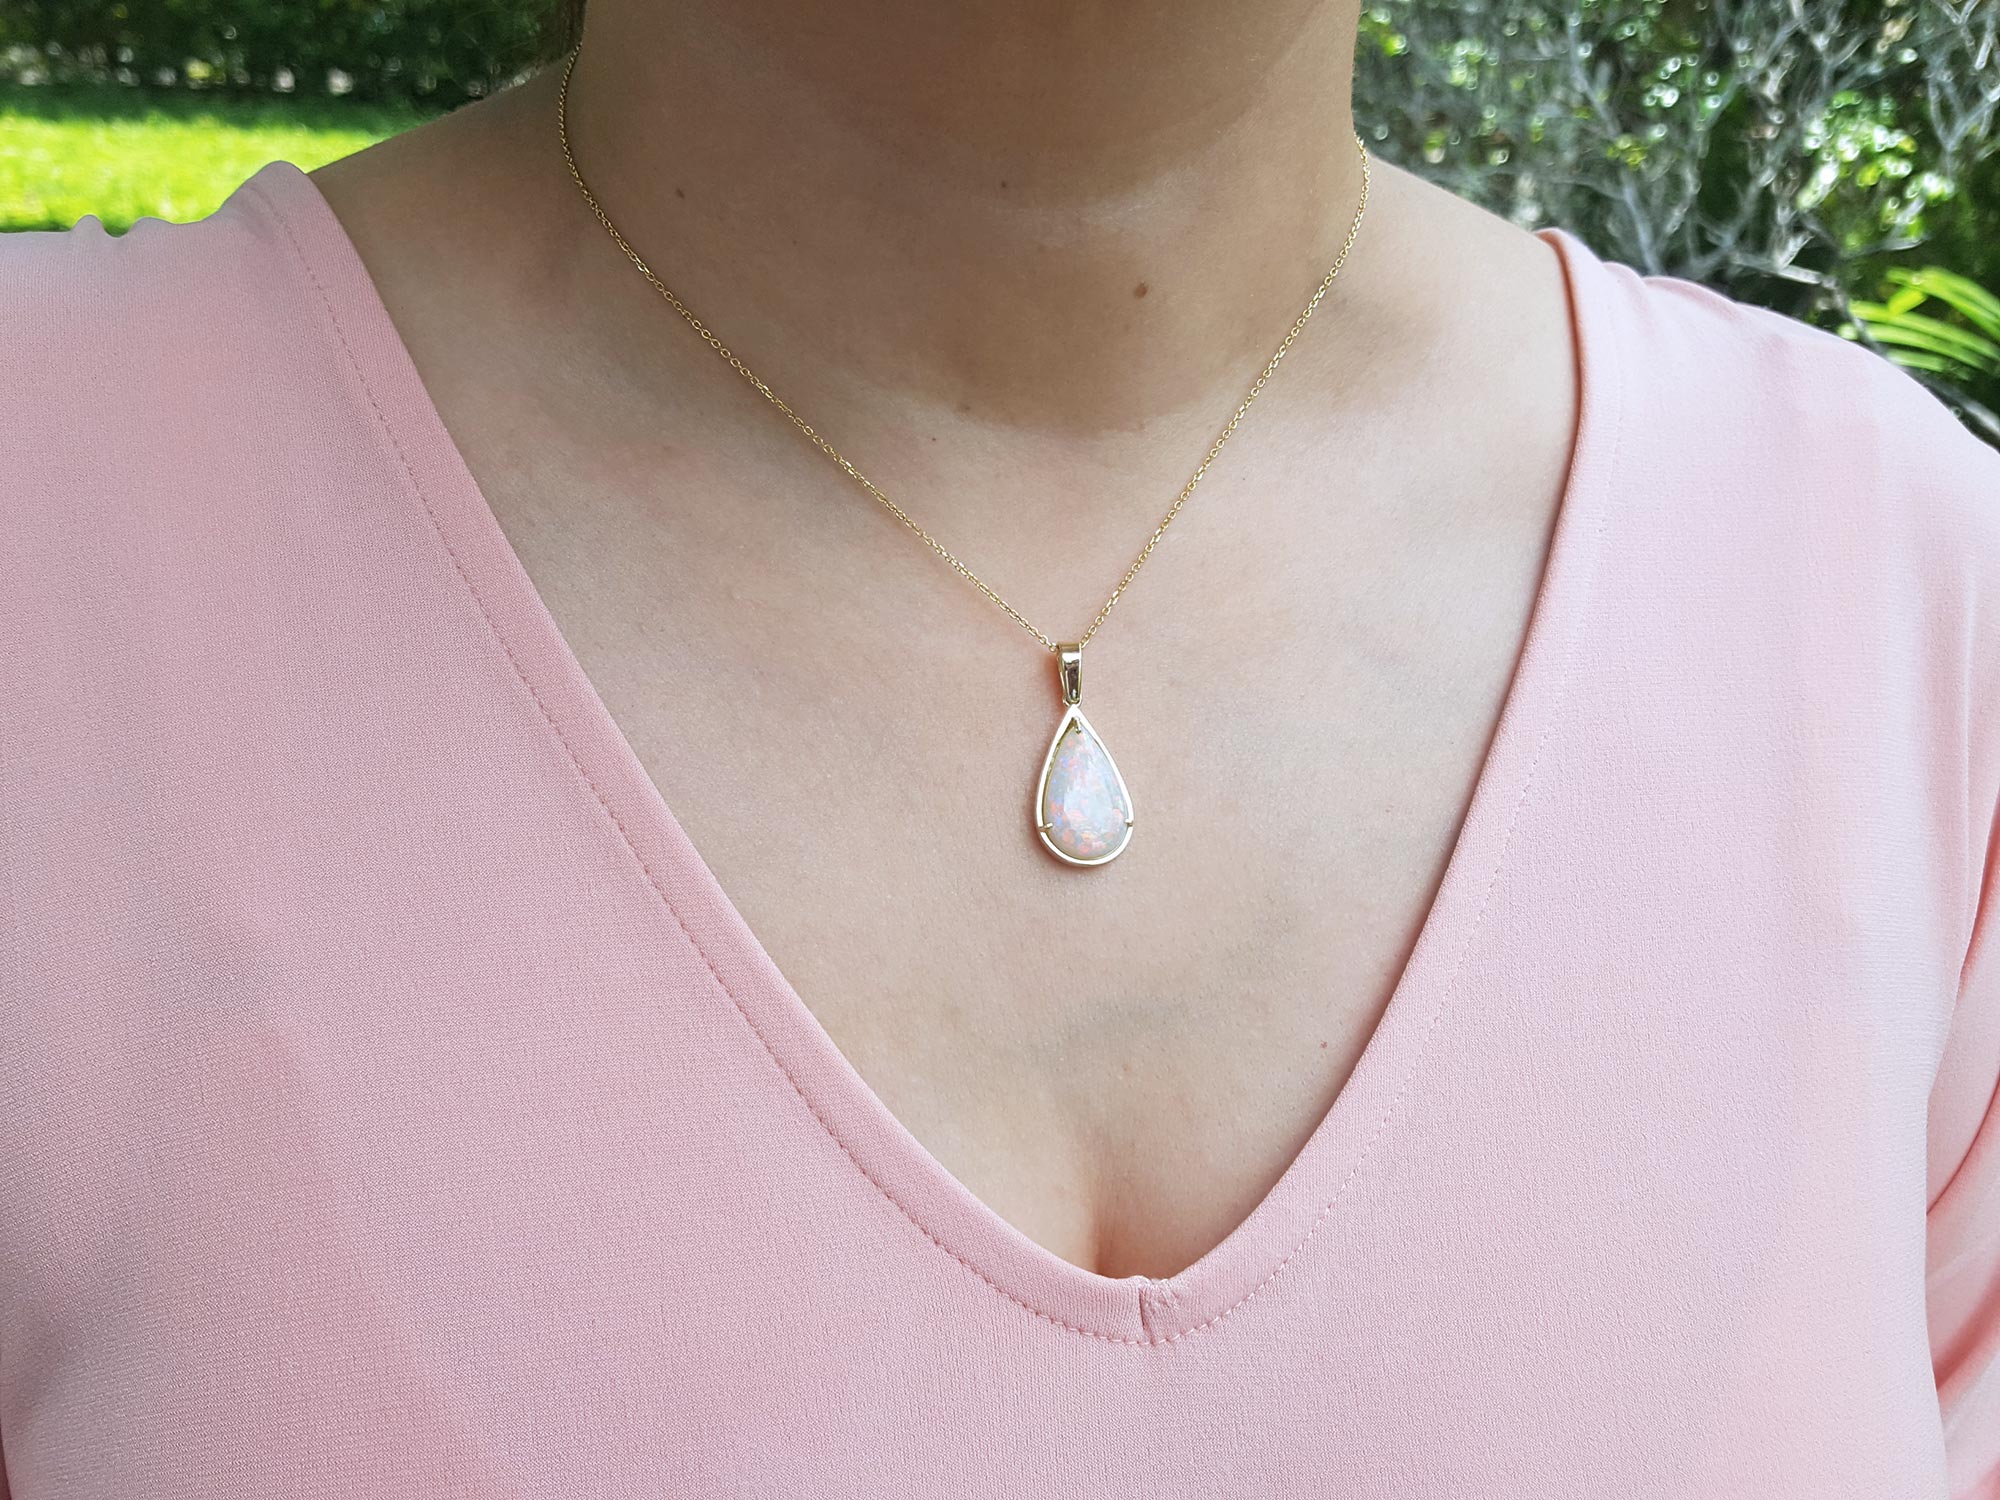 Natural opal necklace